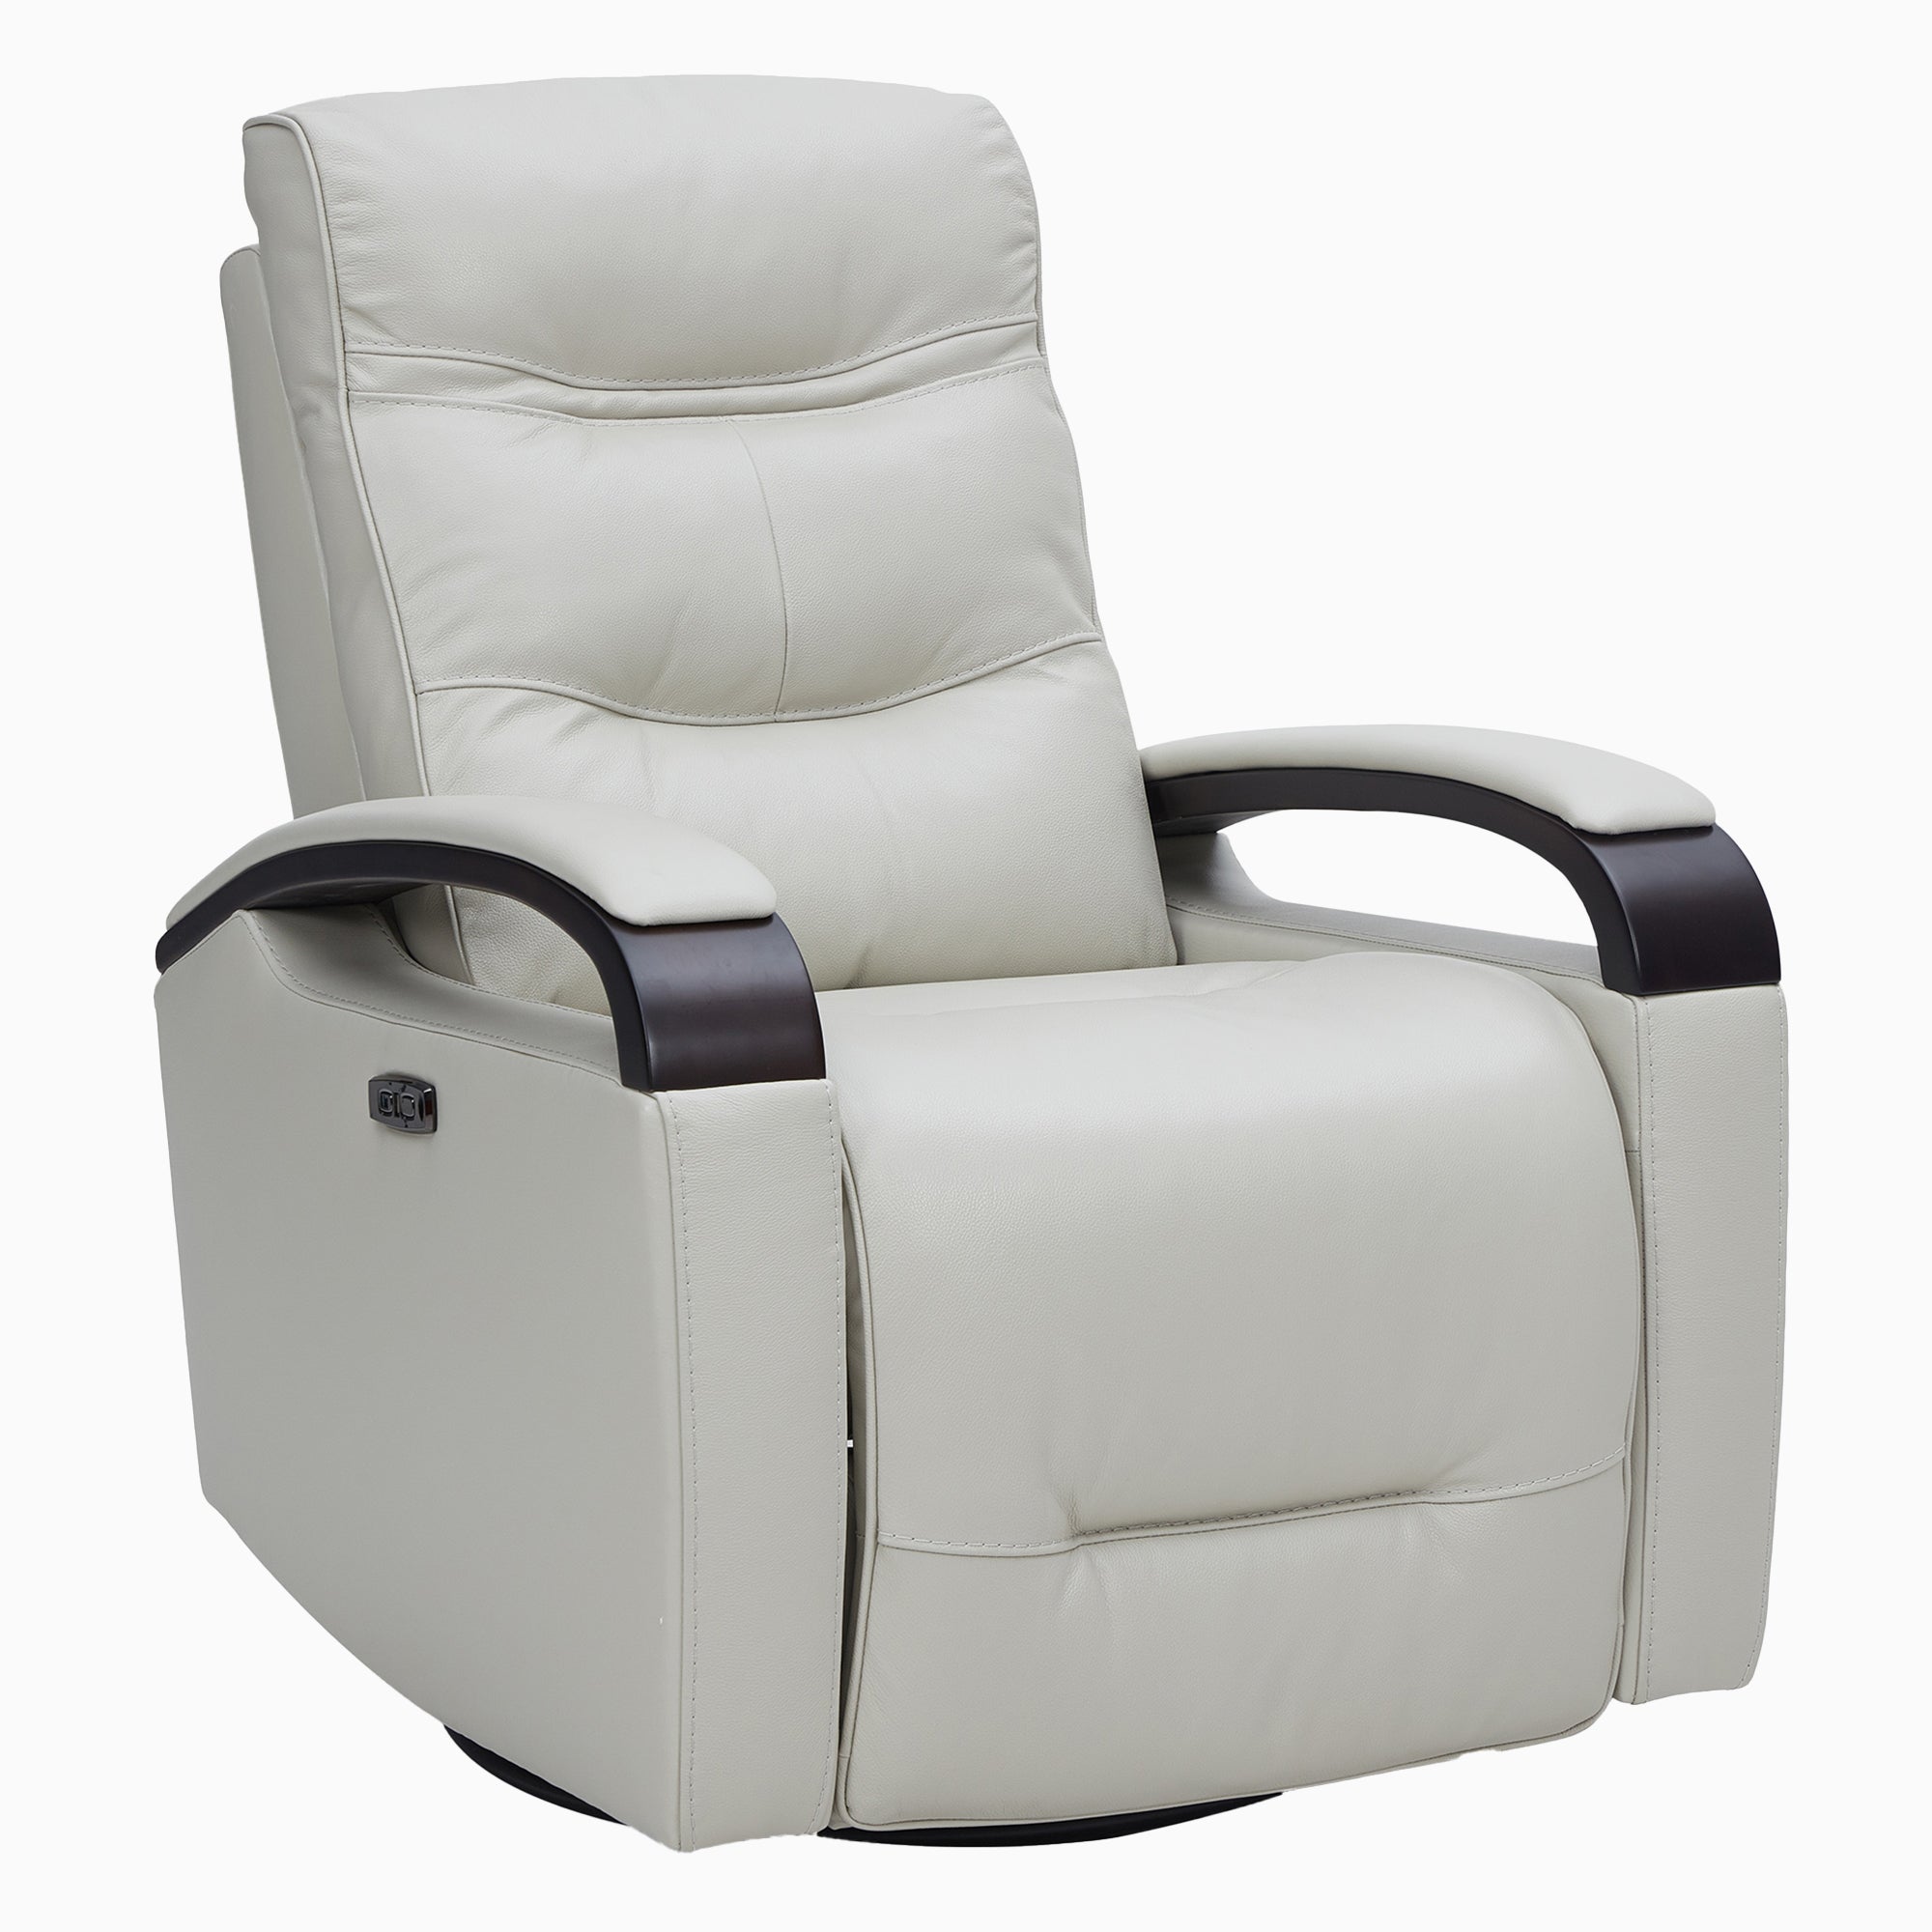 CHITA LIVING-Gentry Leather Power Swivel Glider Recliner with USB Charge-Recliners-Genuine Leather-Light Gray-